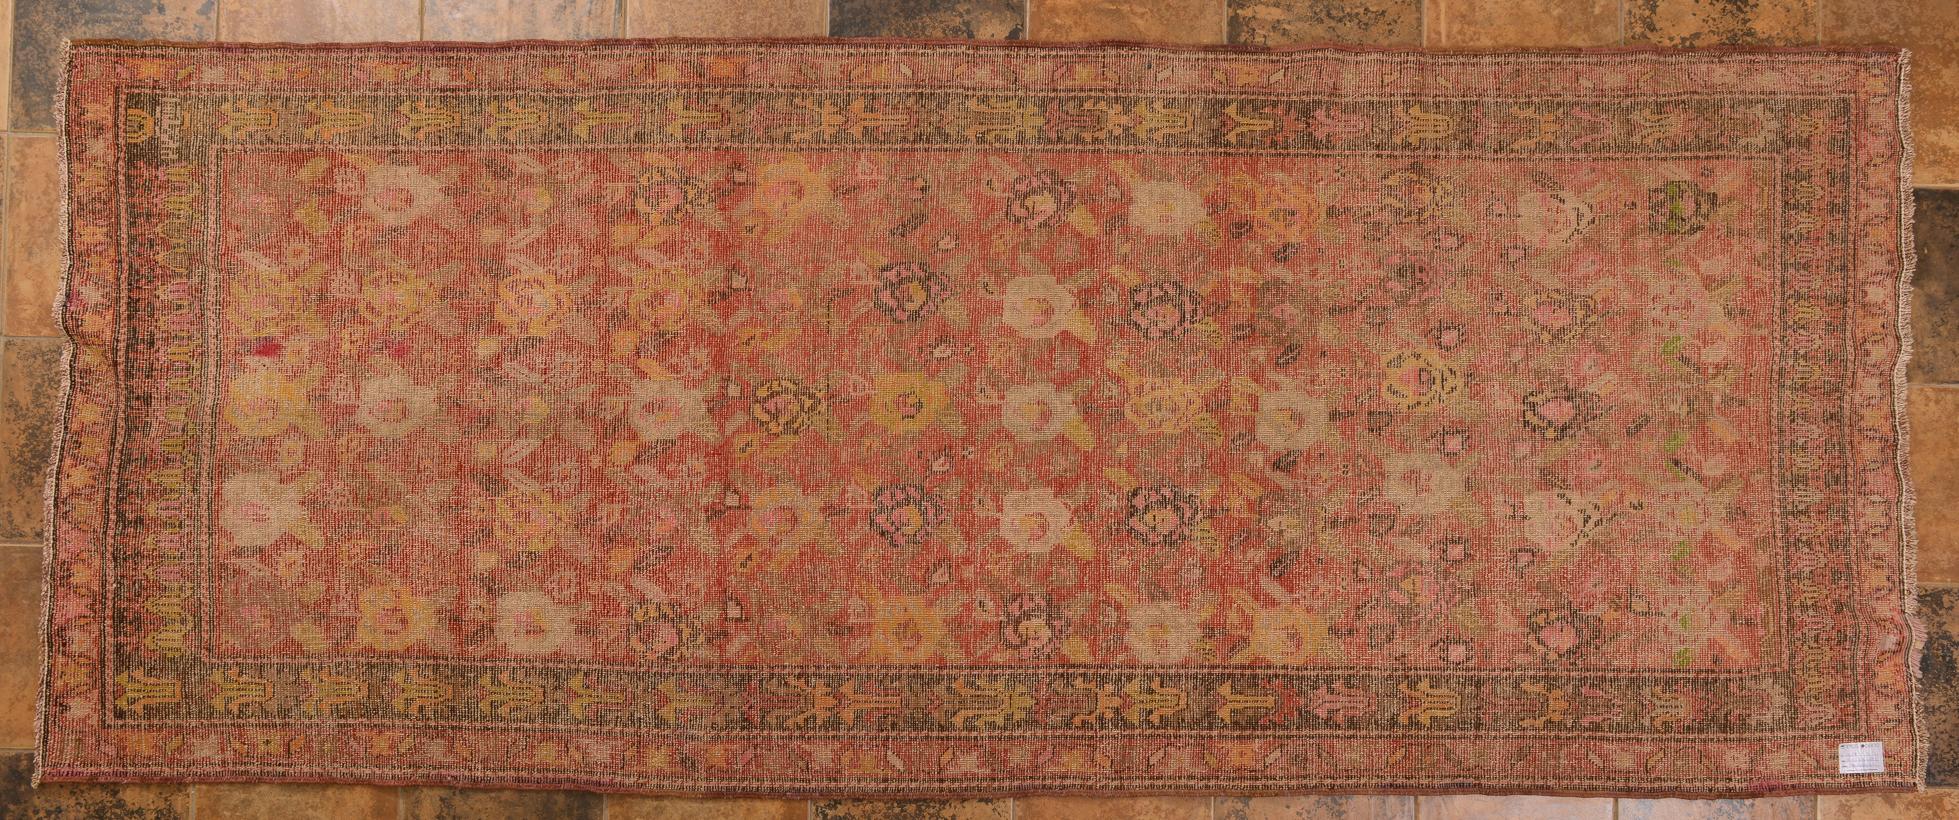 Hand-Knotted Old Karabagh or Garebagh Dated Caucasian Carpet For Sale